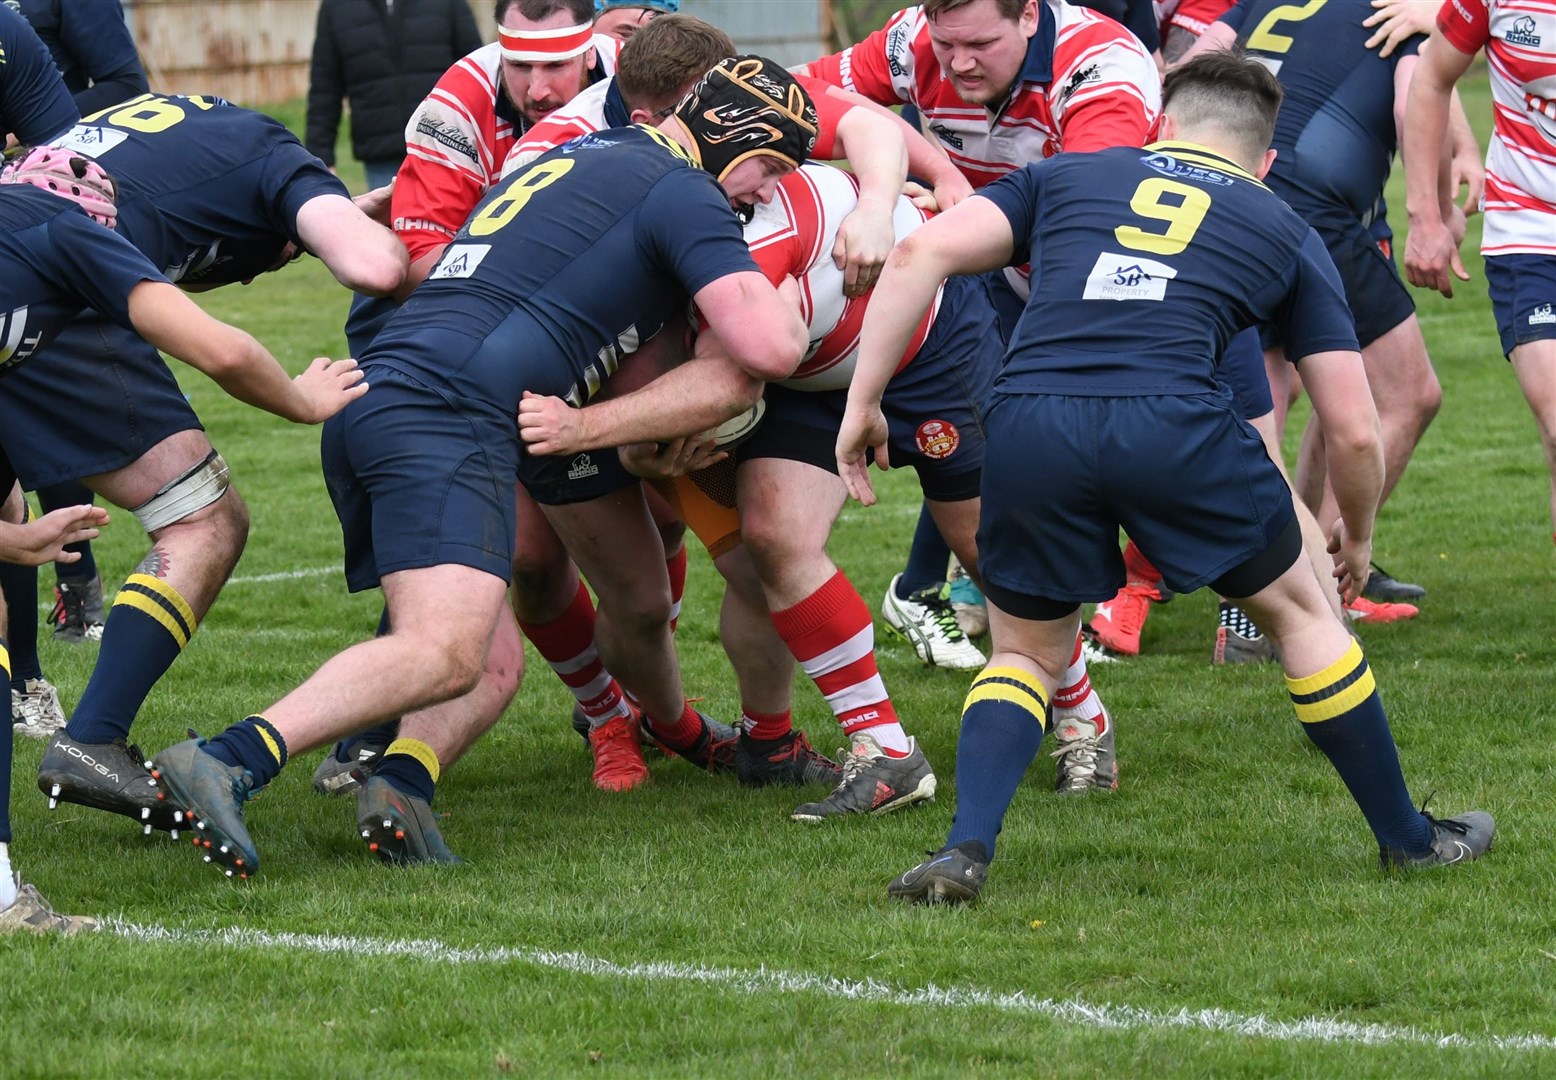 Moray forwards drive towards the line. Picture: James Officer